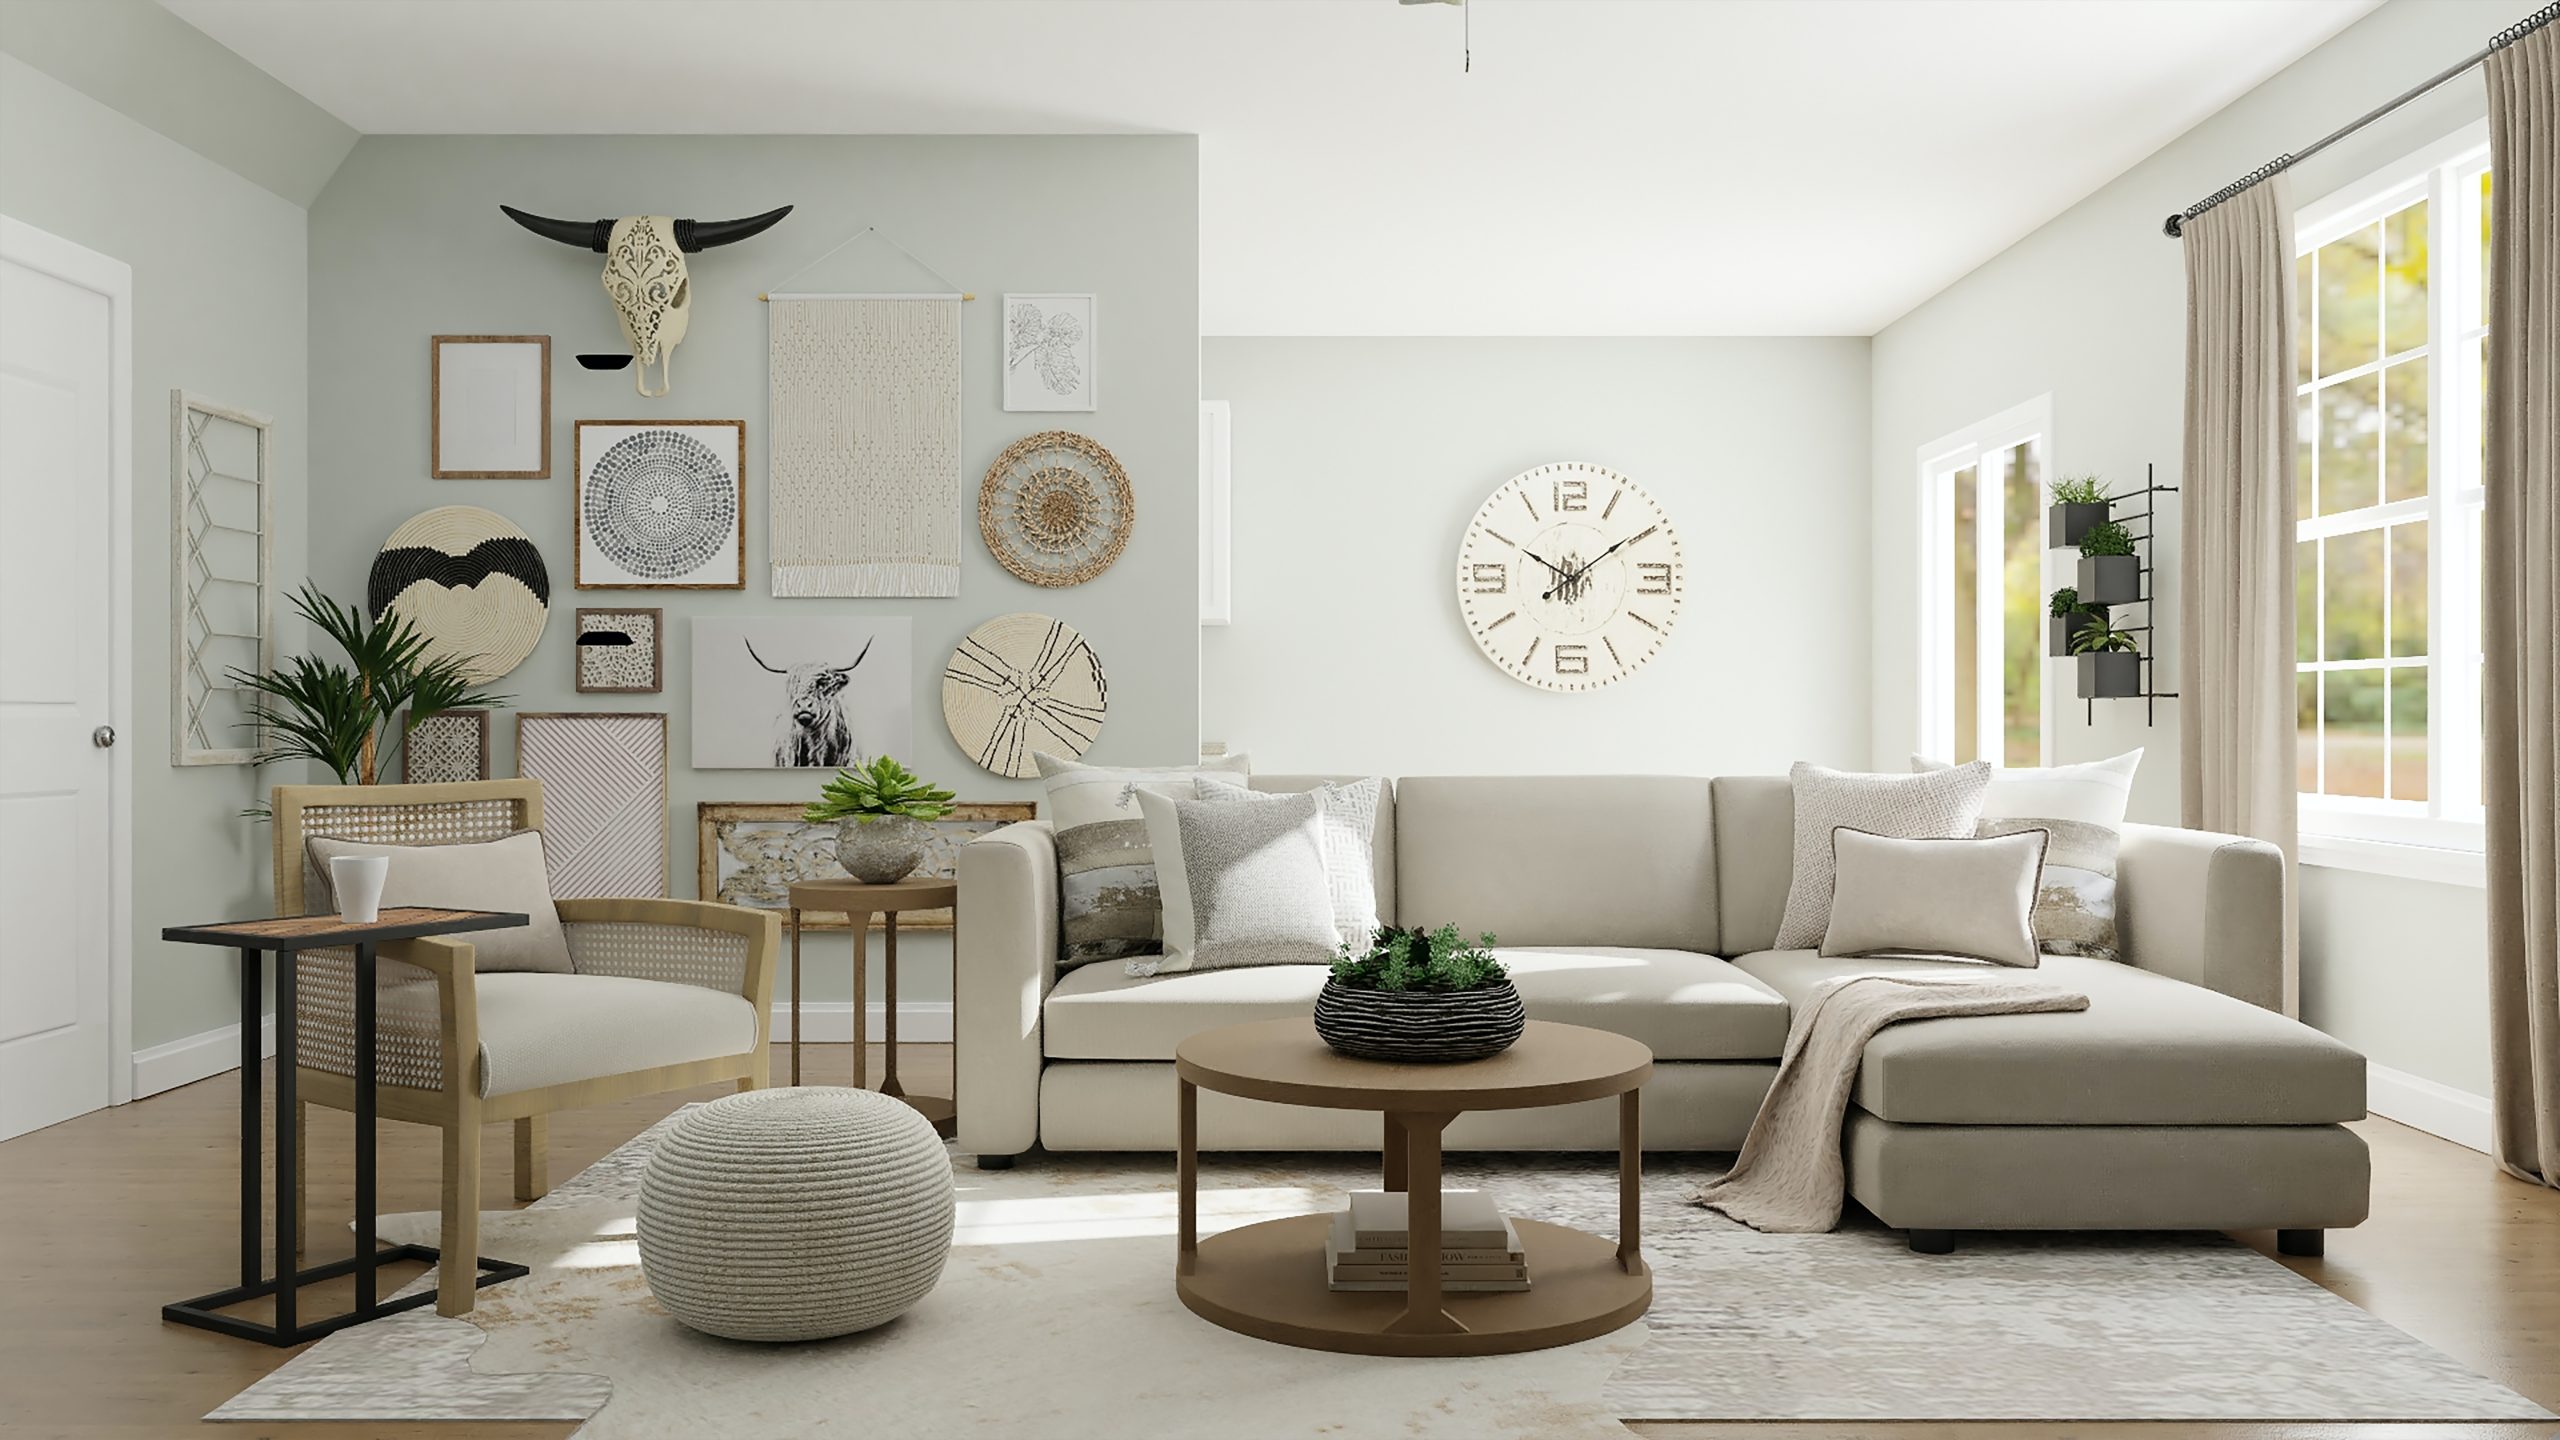 A Detailed Guide to Redecorating Your House with Comfort, Coziness & Calm in Mind